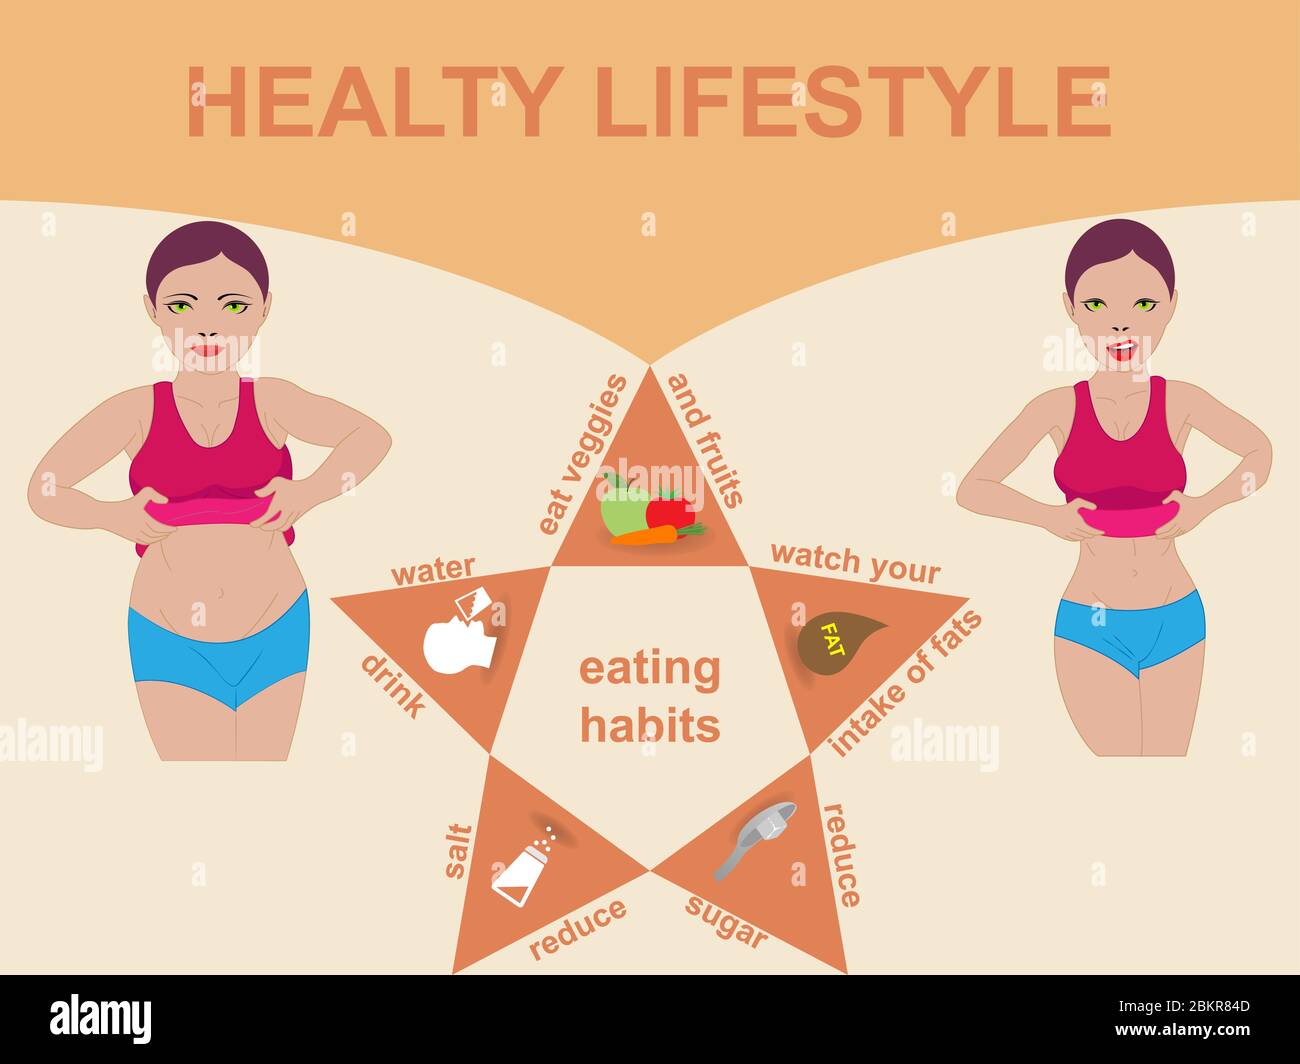 Healthy lifestyle concept showing a fat and a thin woman with different eating habits Stock Vector